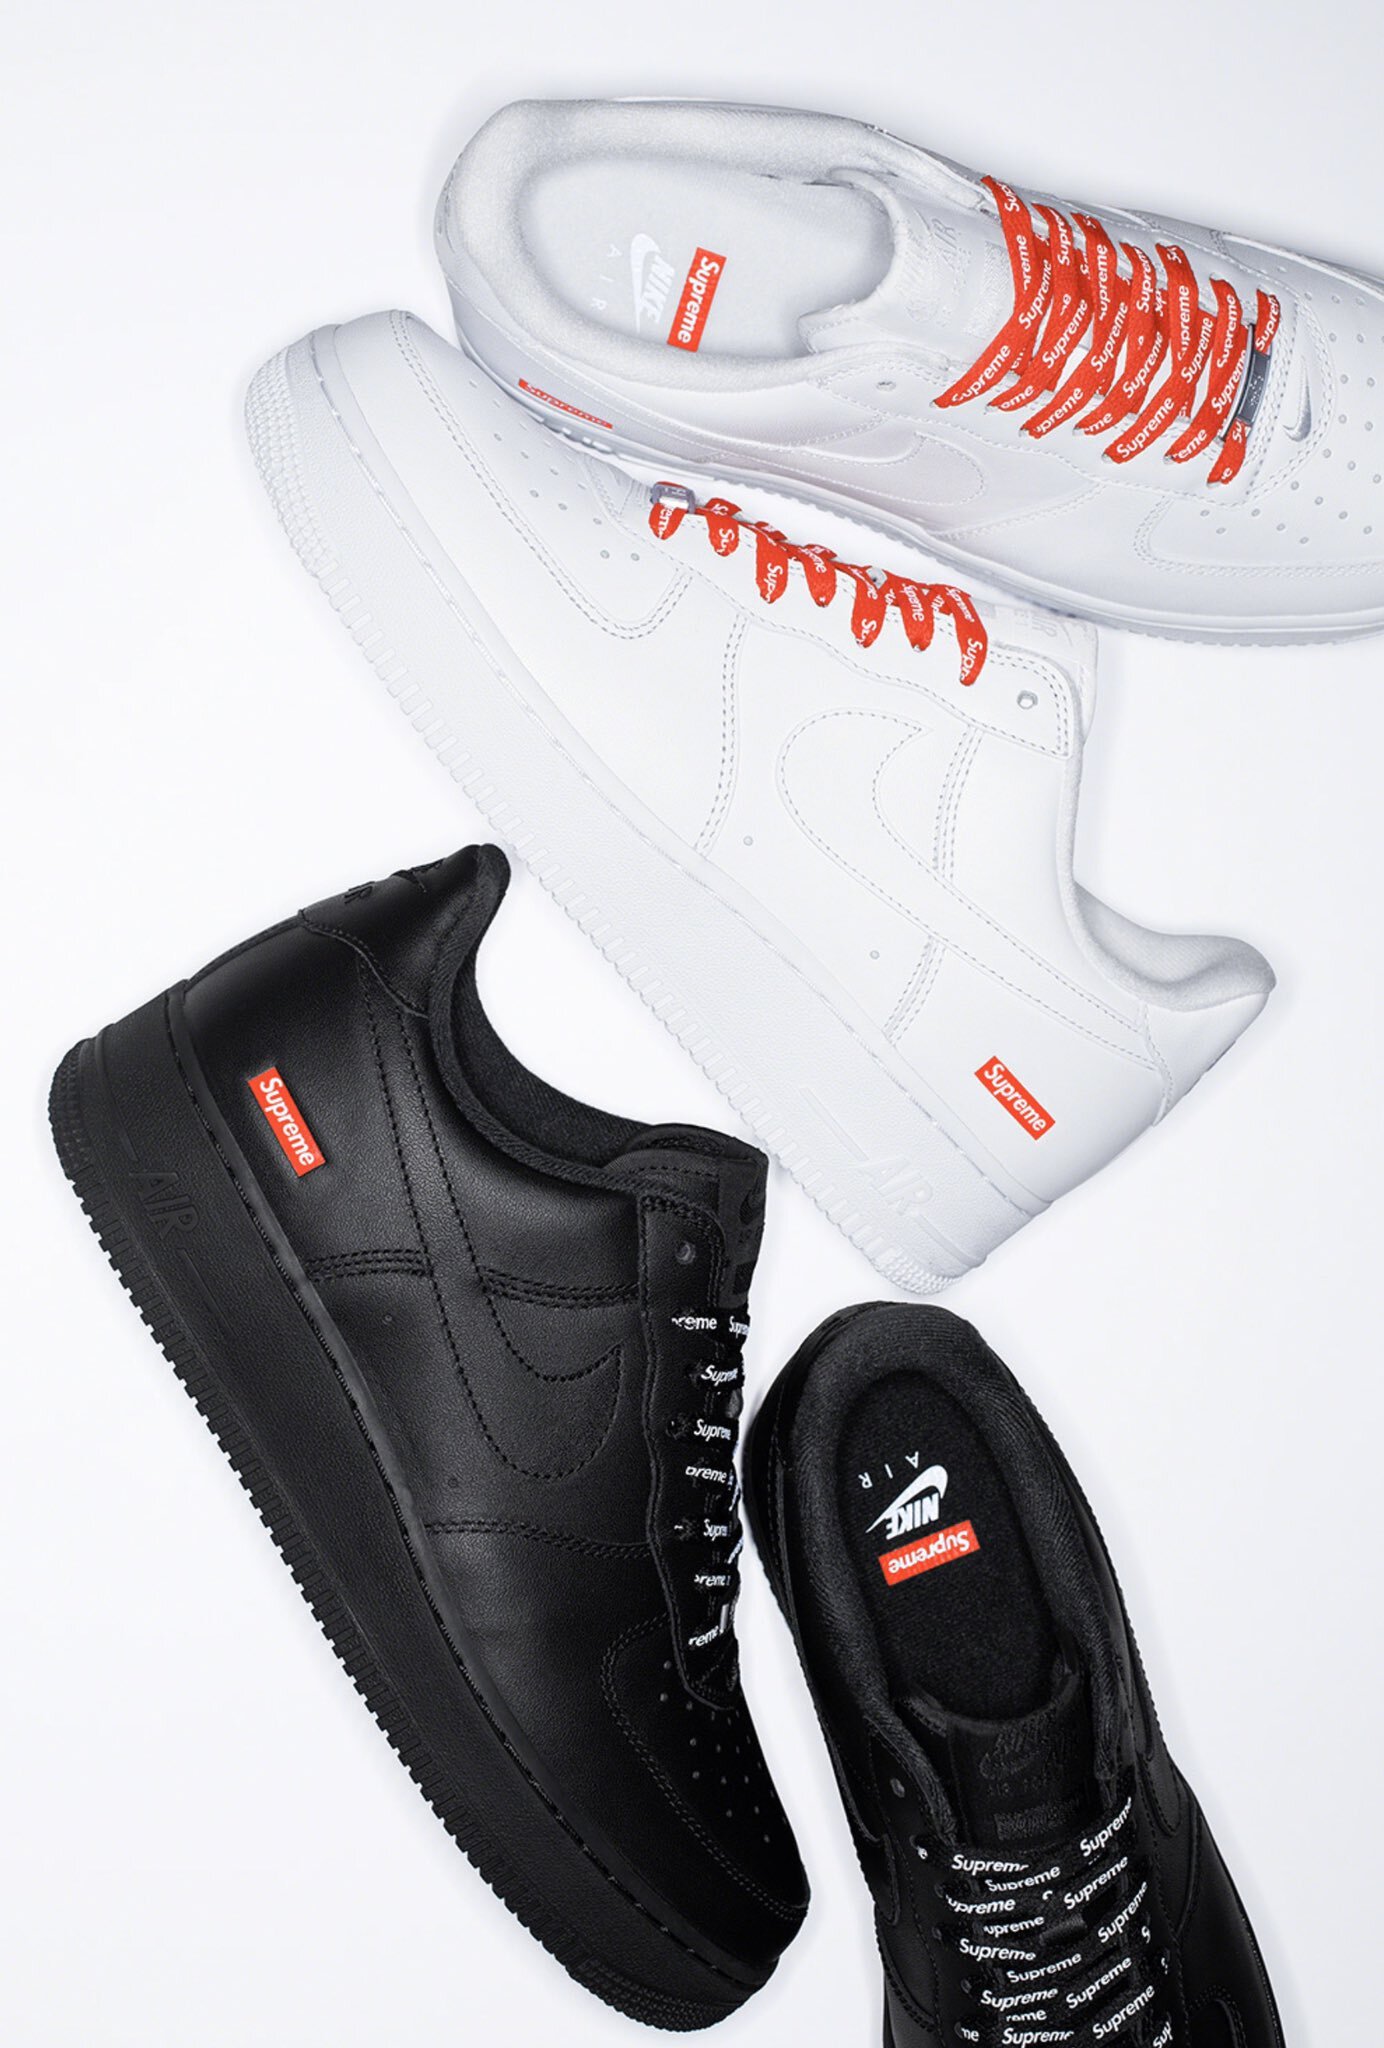 Now Available: Supreme x Nike Air Force 1 Low 